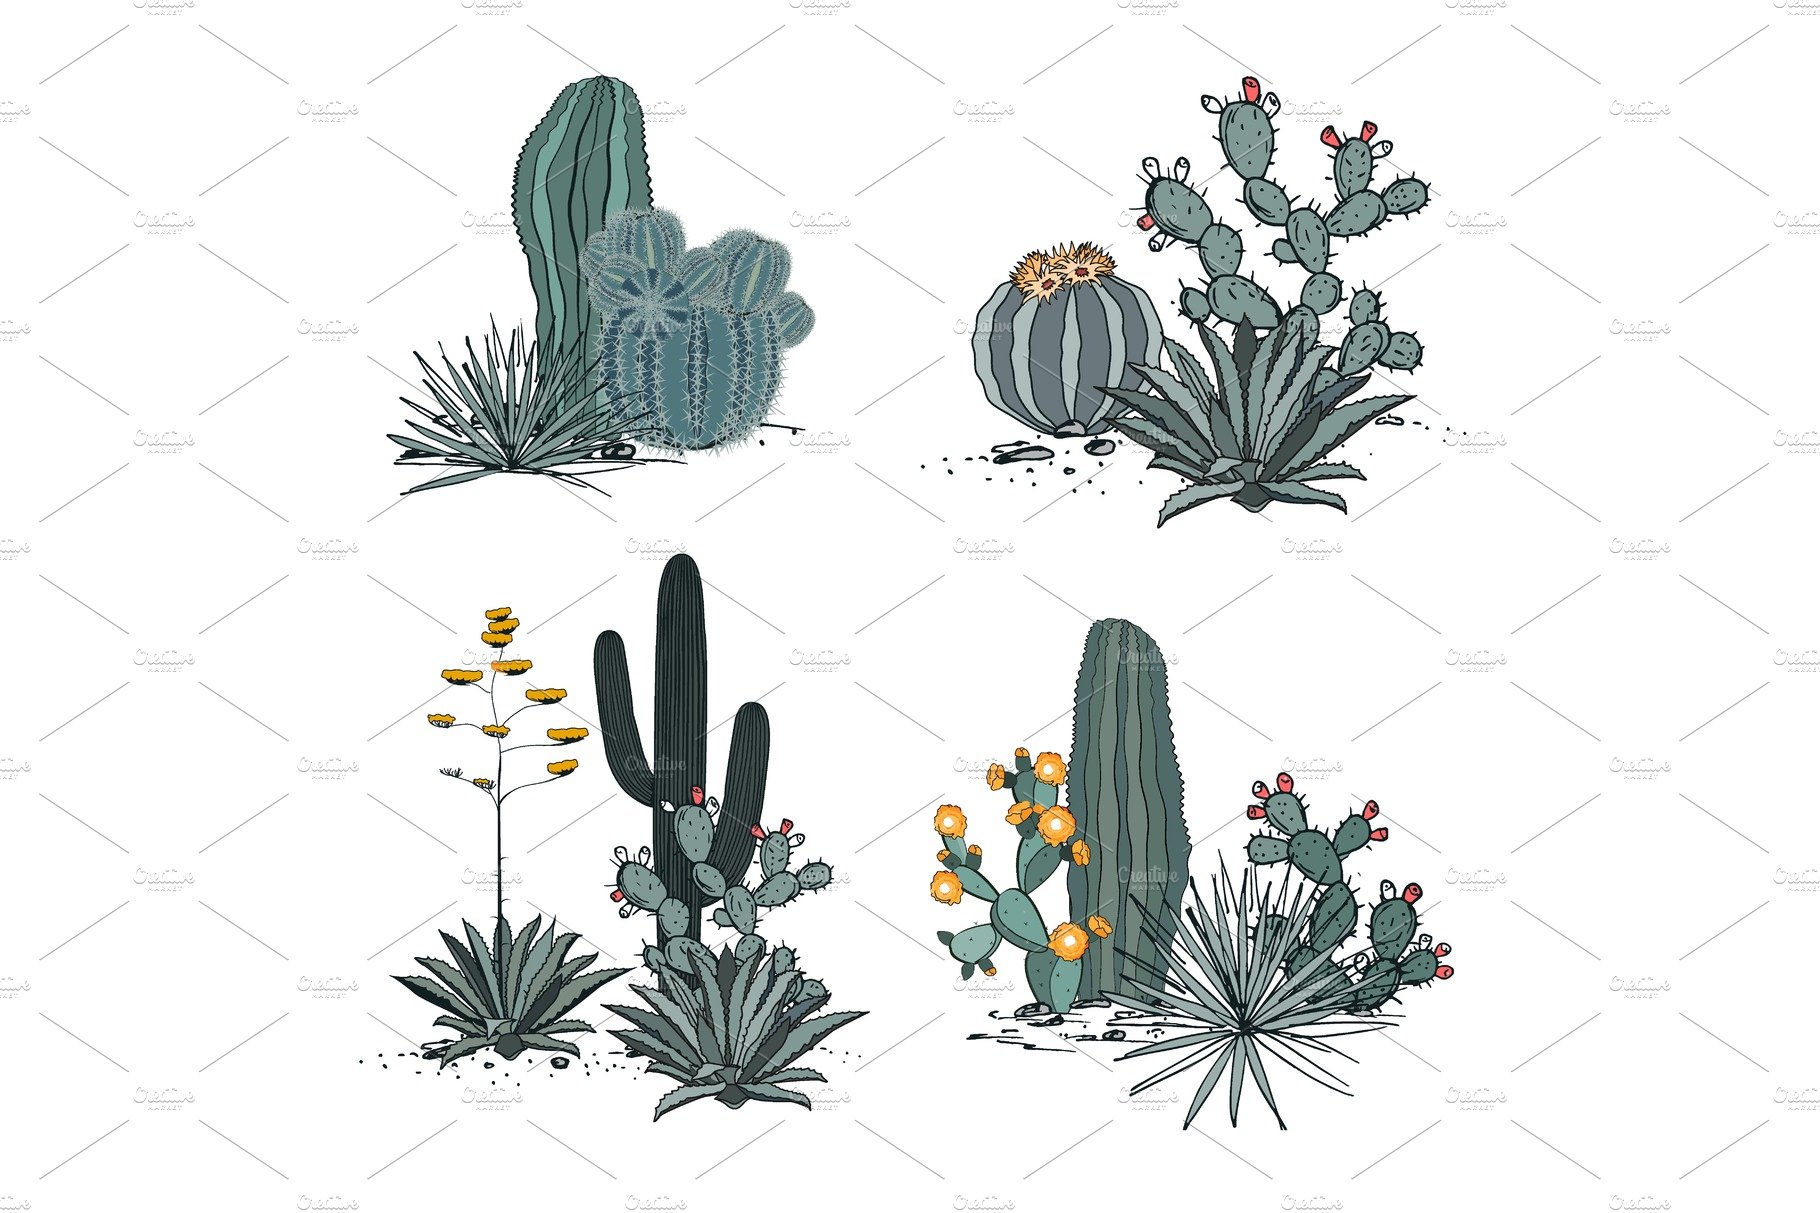 Variety of cactus plants.